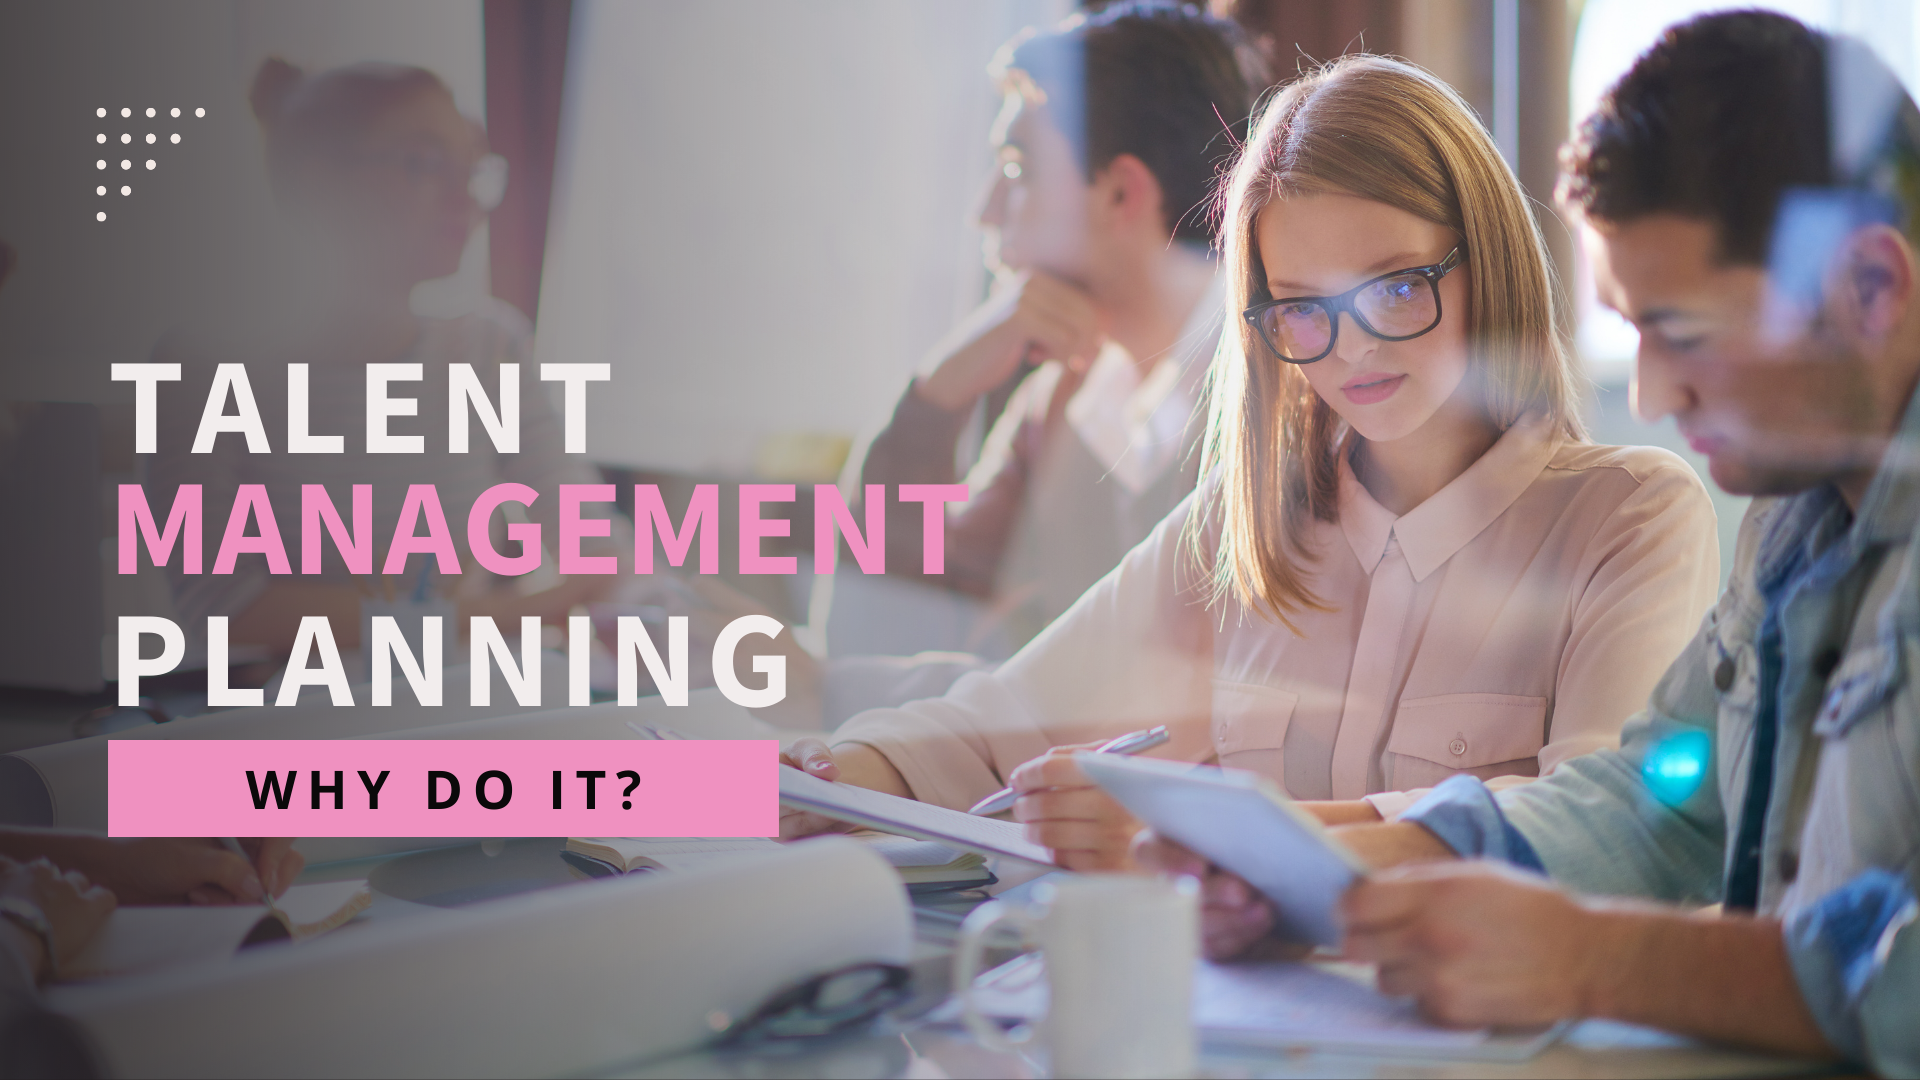 Talent Management Planning: Why Do It?